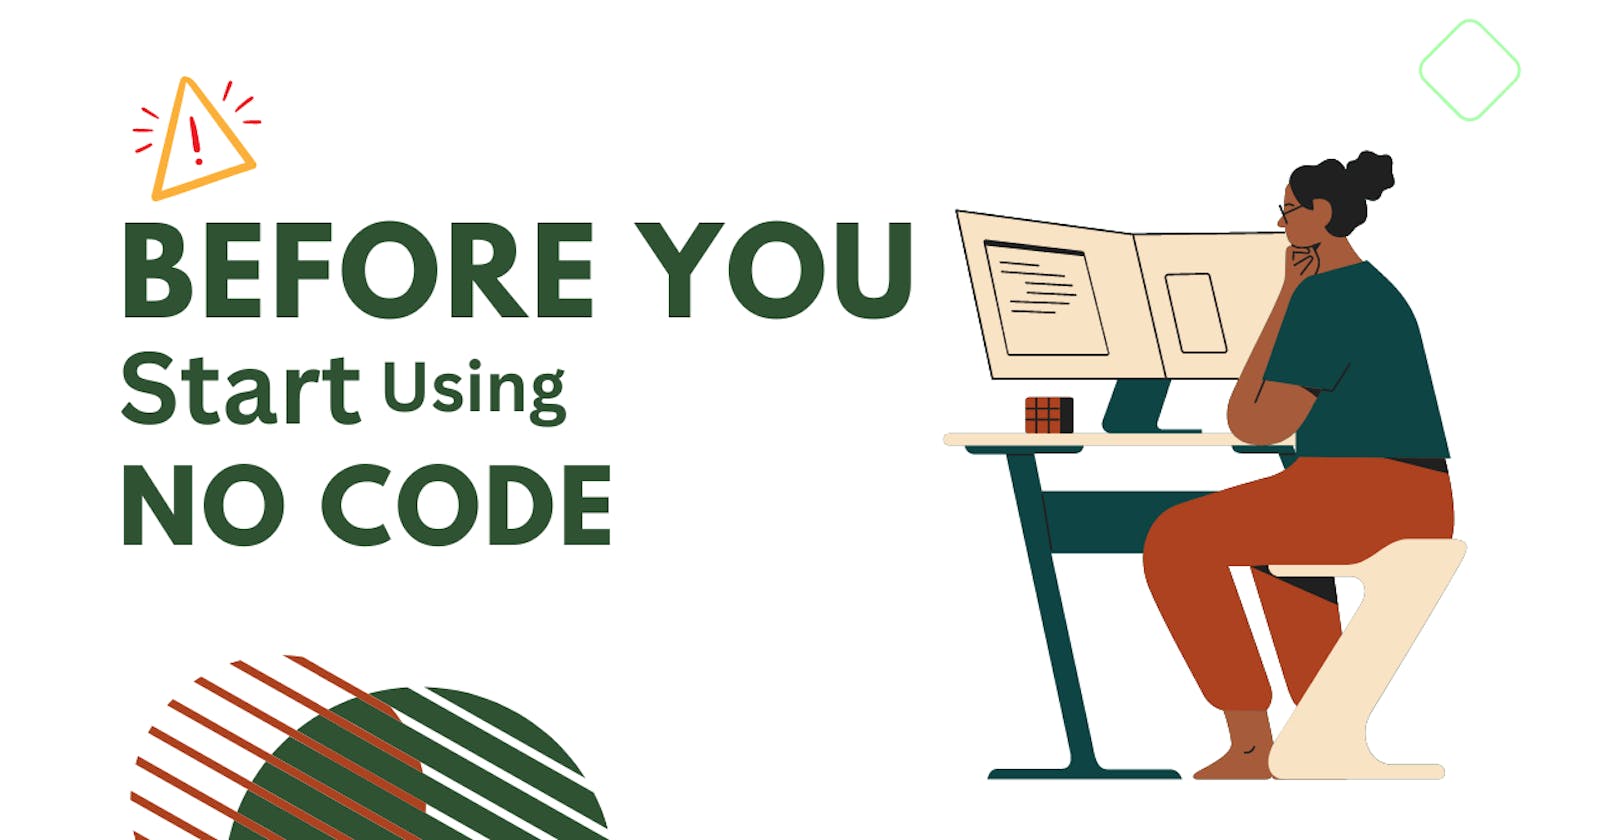 Pros and cons of using no-code